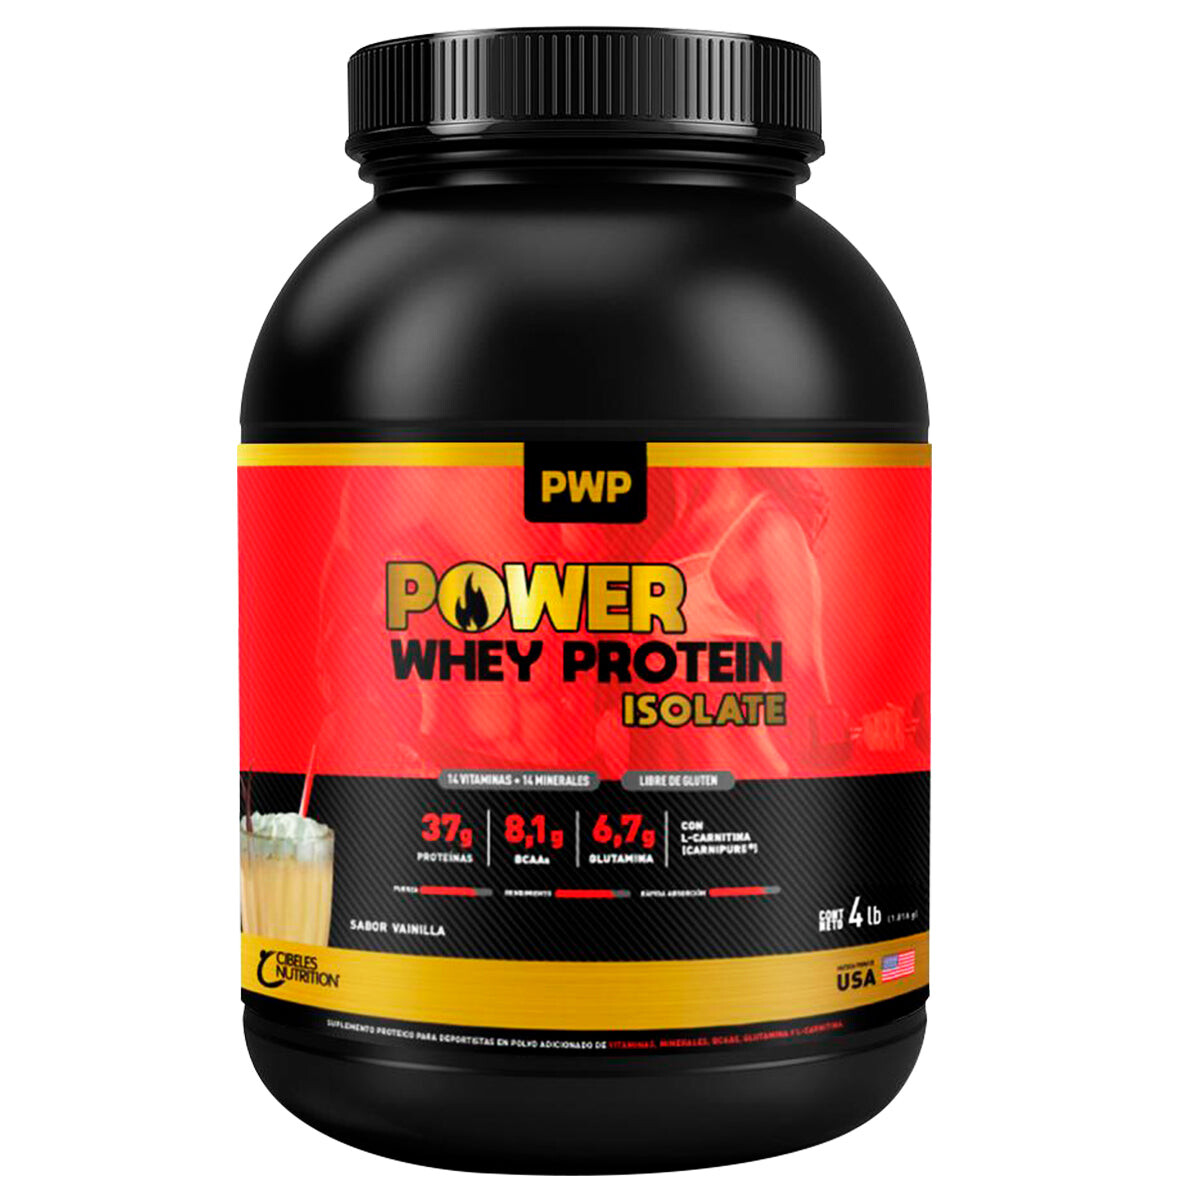 Suplemento Pwp Whey Protein Isolate 1816g Calidad Nº1 - Vainilla 